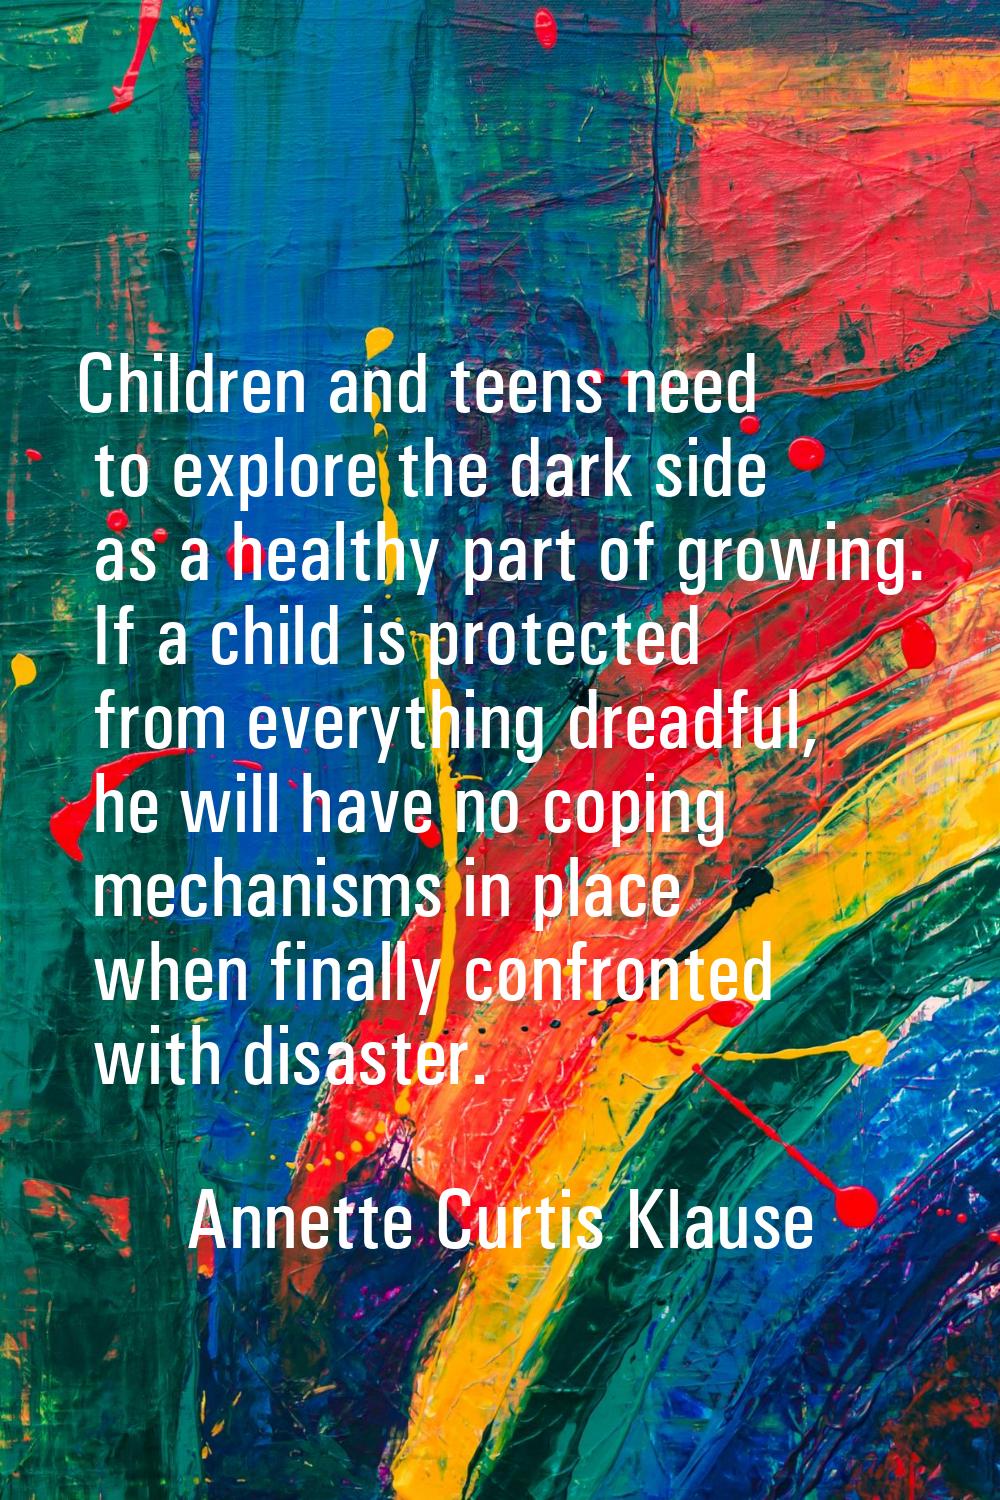 Children and teens need to explore the dark side as a healthy part of growing. If a child is protec